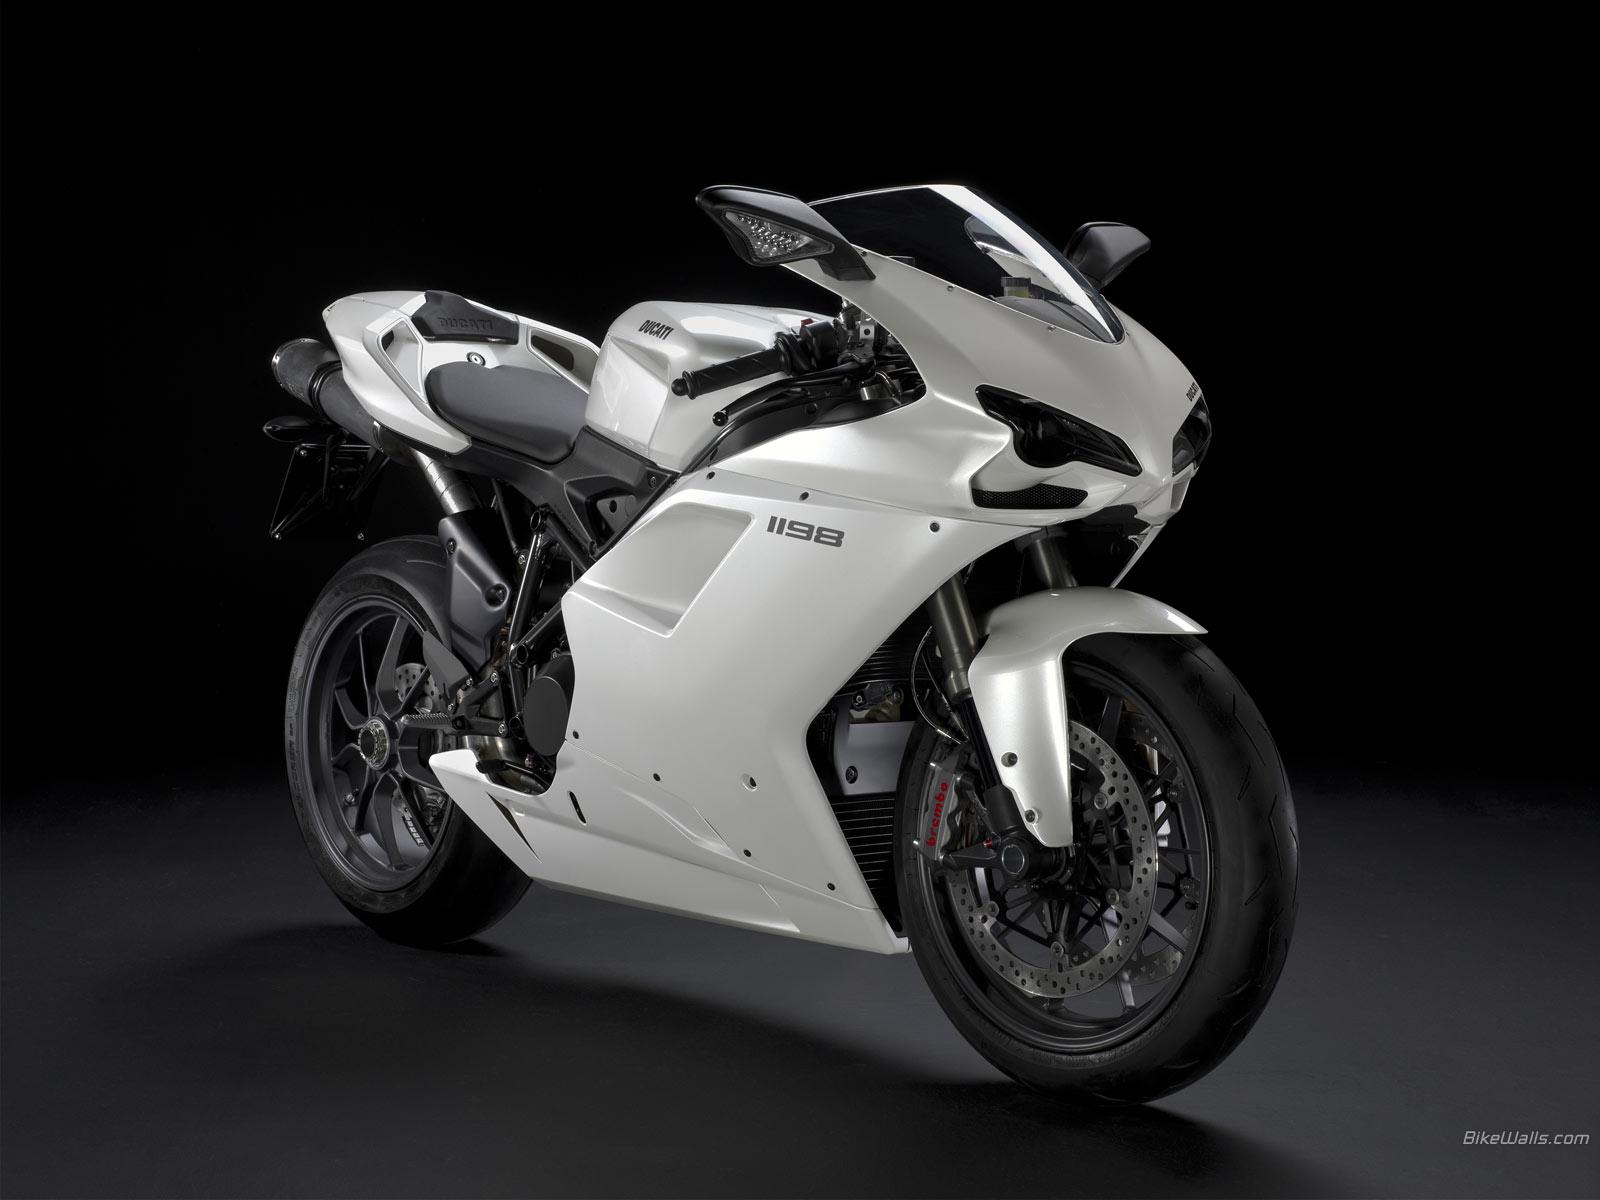 Download the Angled 2009 Ducati 1198 Wallpaper, Angled 2009